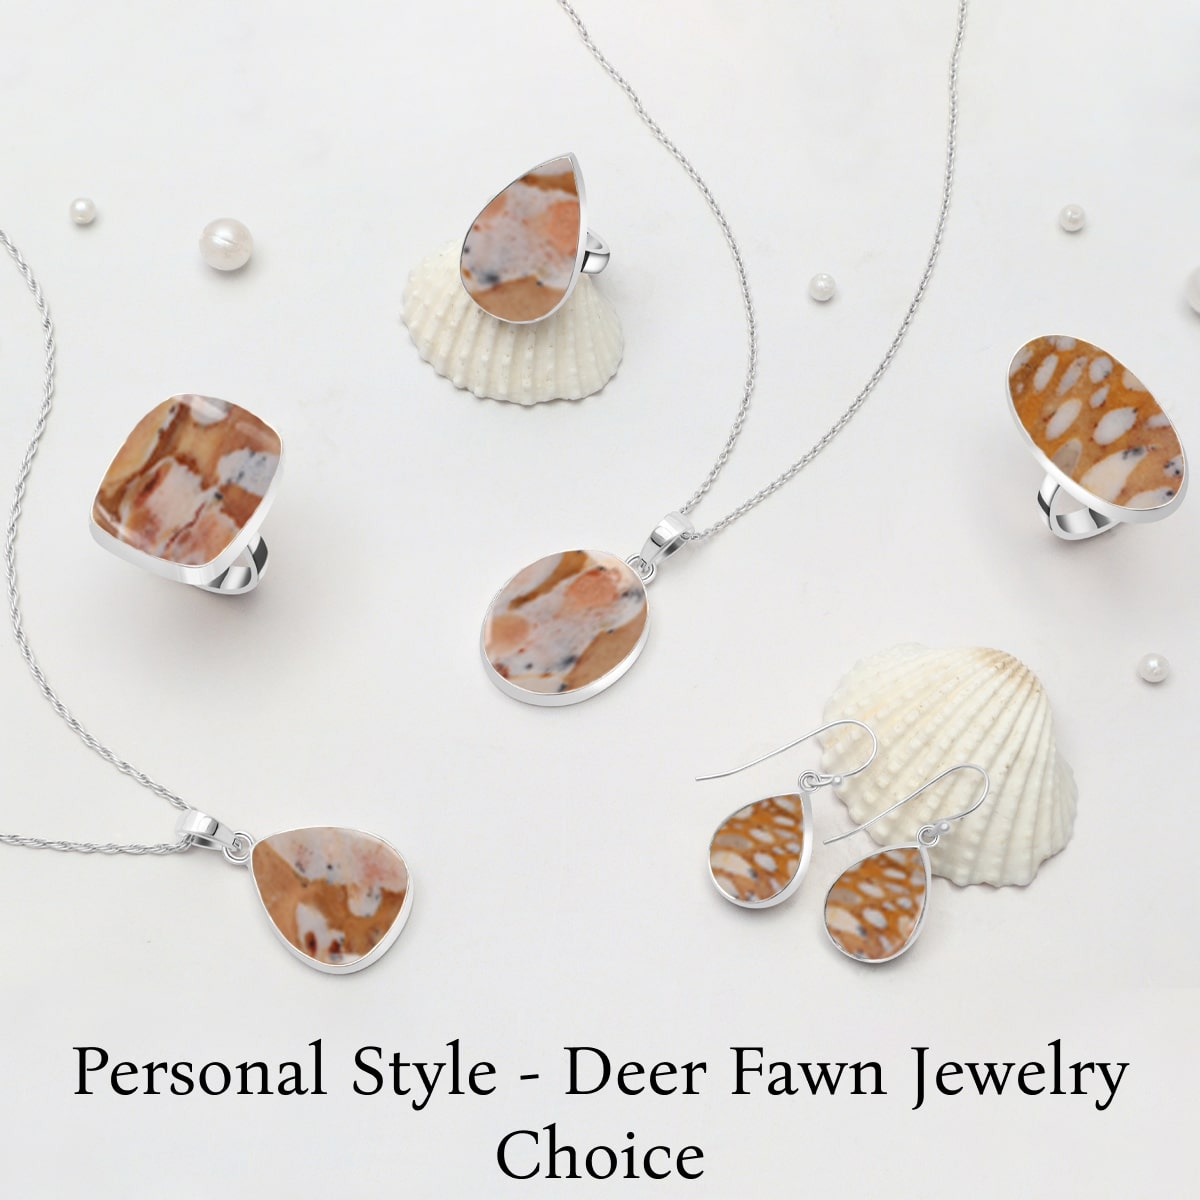 There are several reasons why individuals may choose to wear deer fawn jewelry